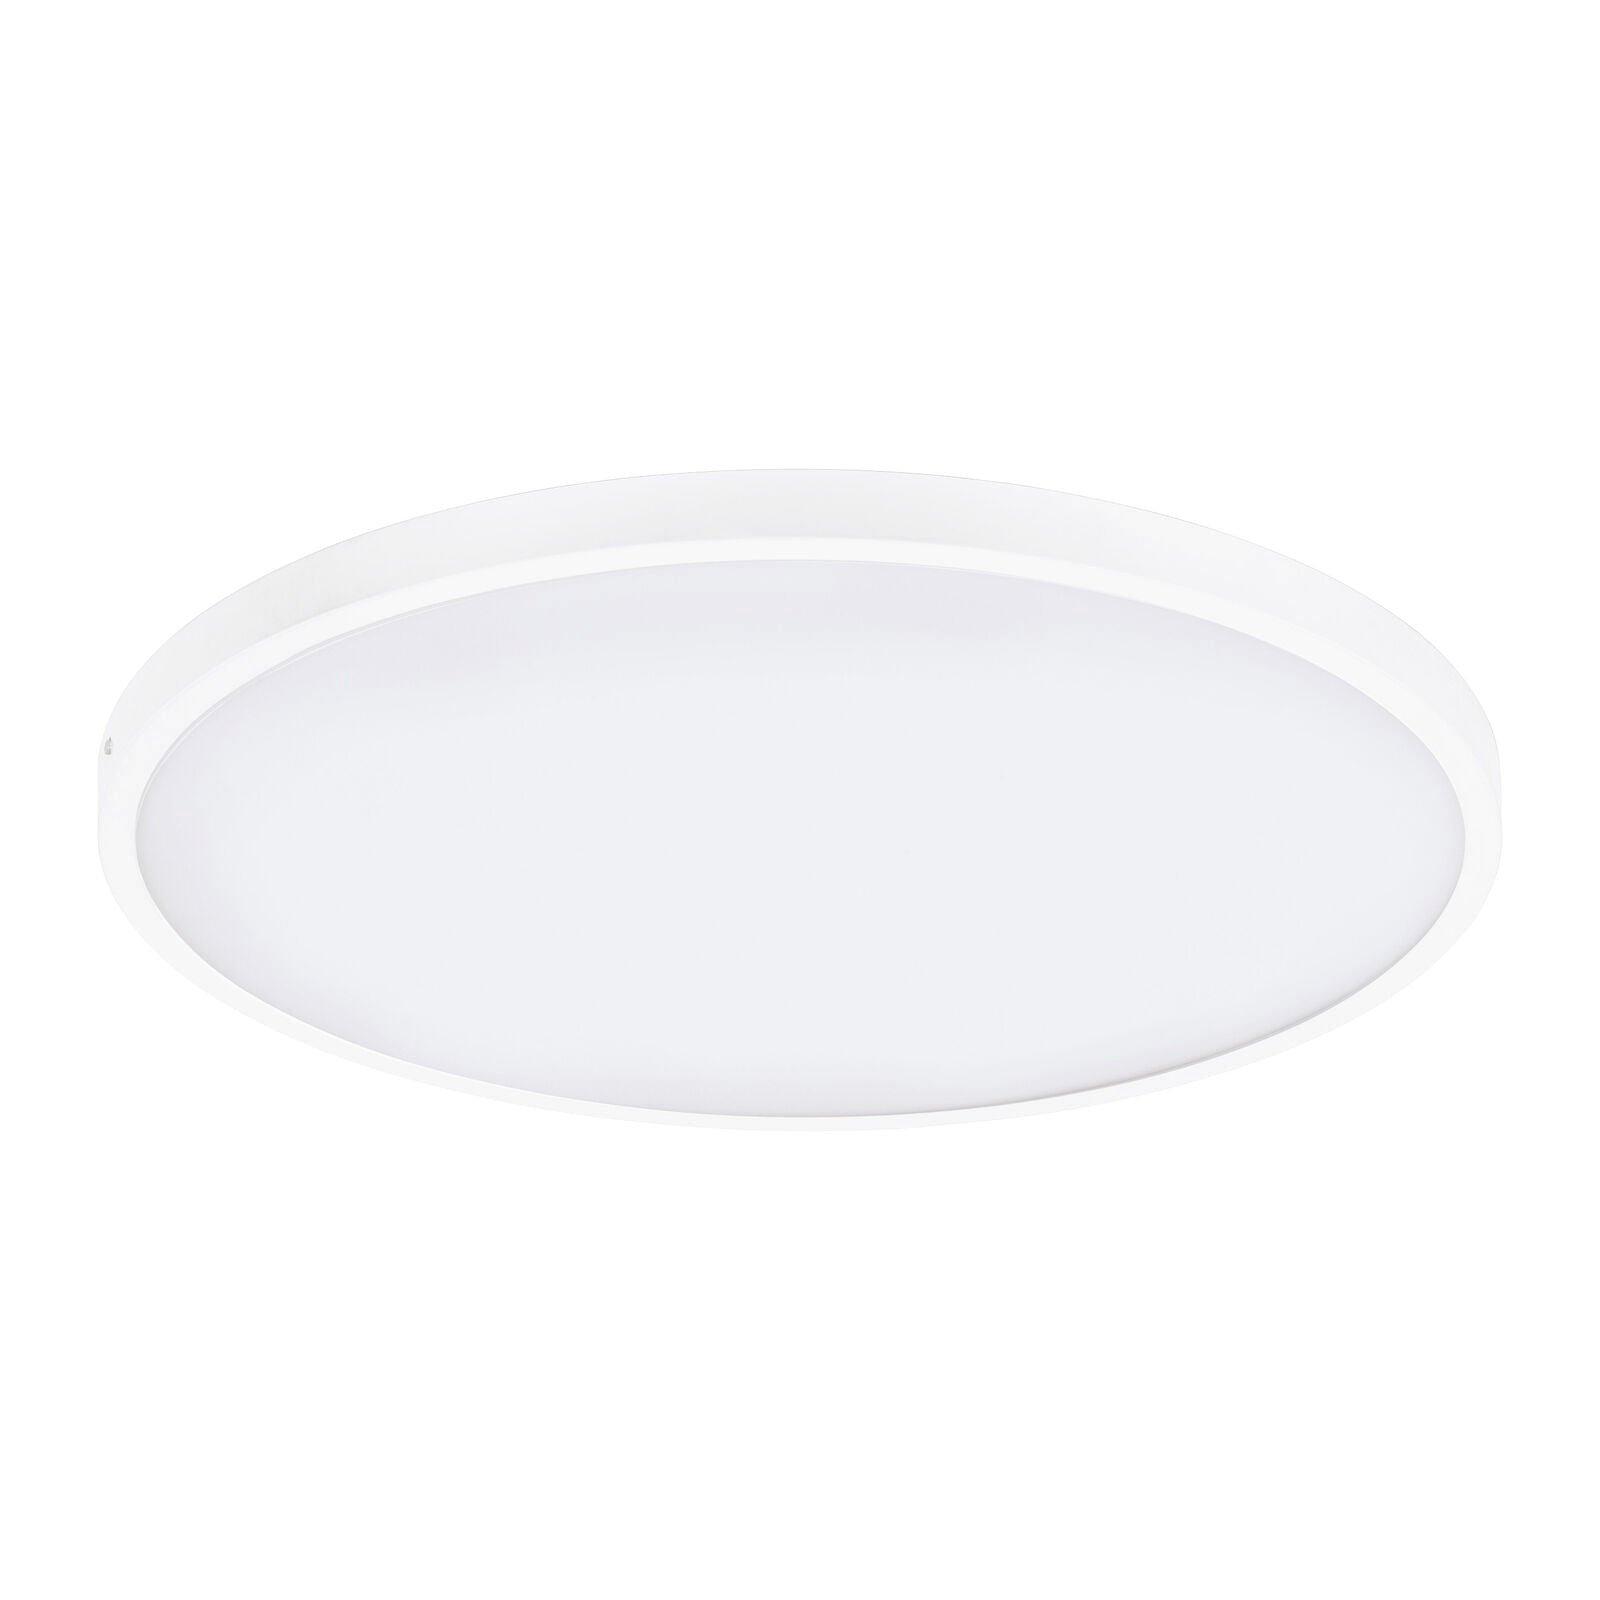 Wall / Ceiling Light White 600mm Round Surface Mounted 27W LED 3000K